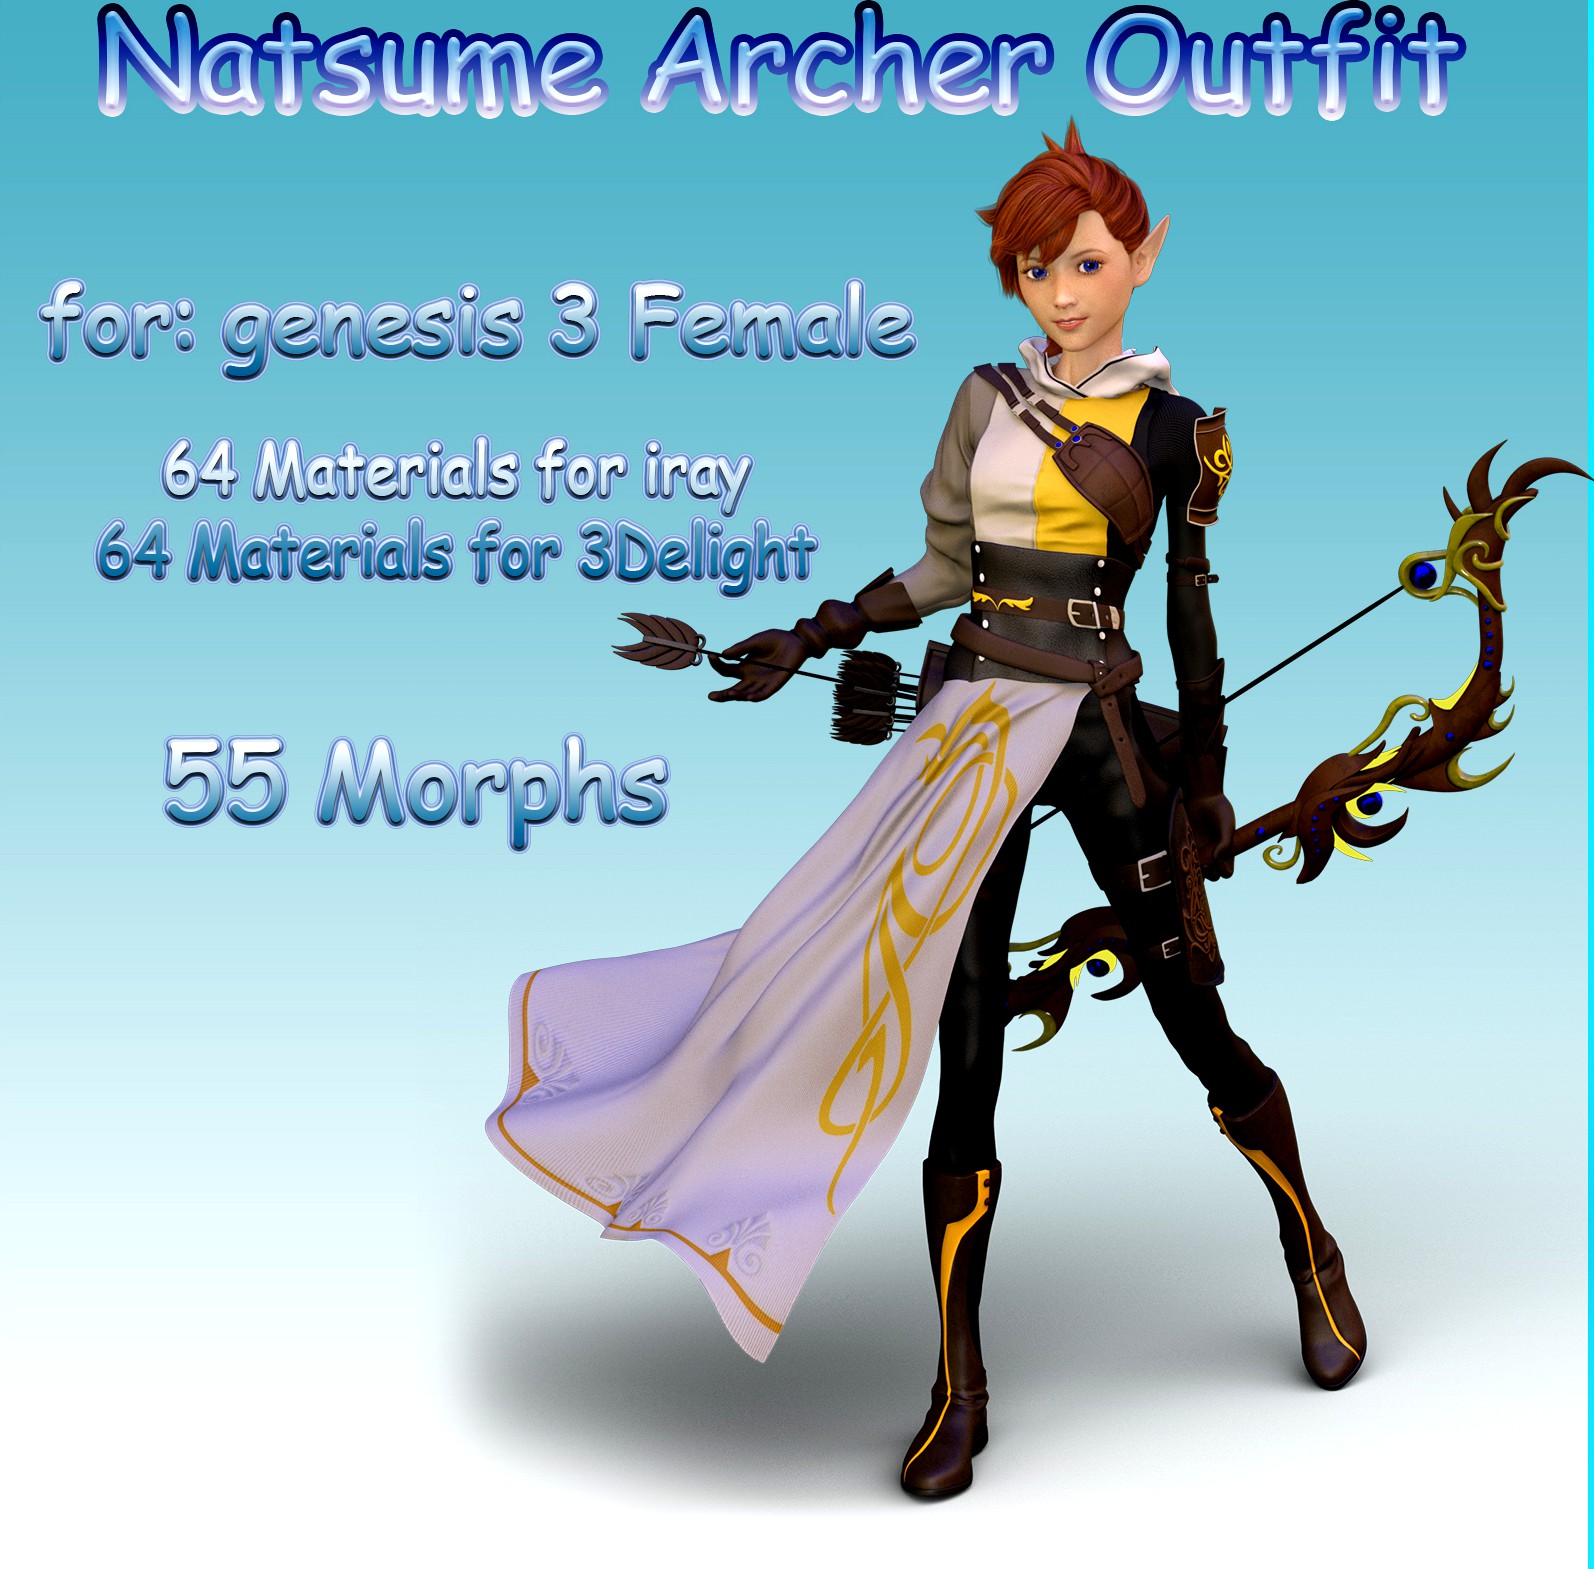 Natsume Archer Outfit for G3F